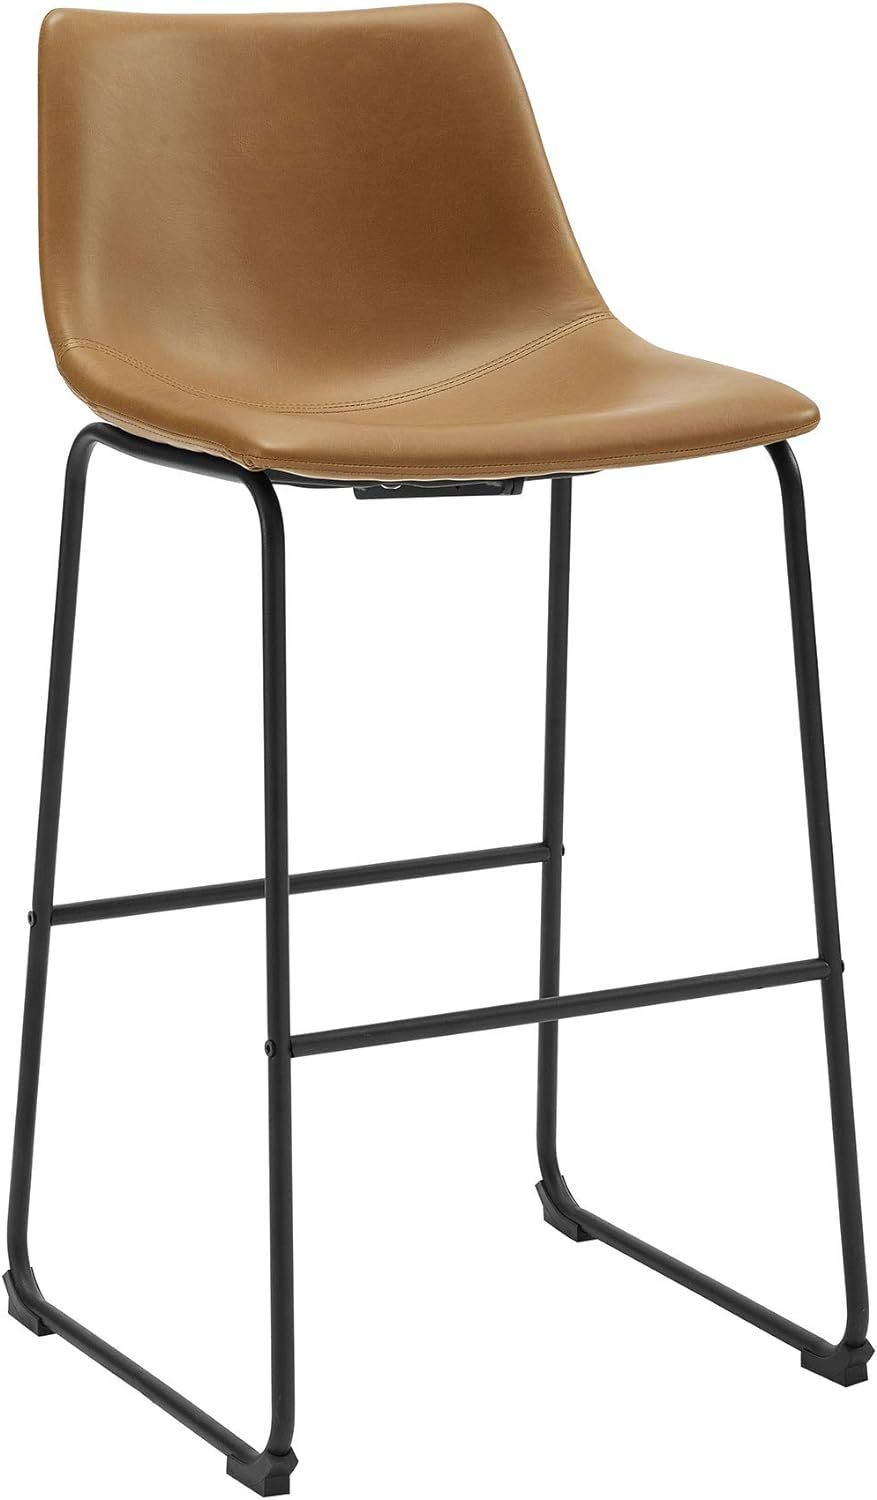 New Set of 2 Faux Leather Barstools with 30 Inch Seat Height Whiskey Brown | Amazon (US)